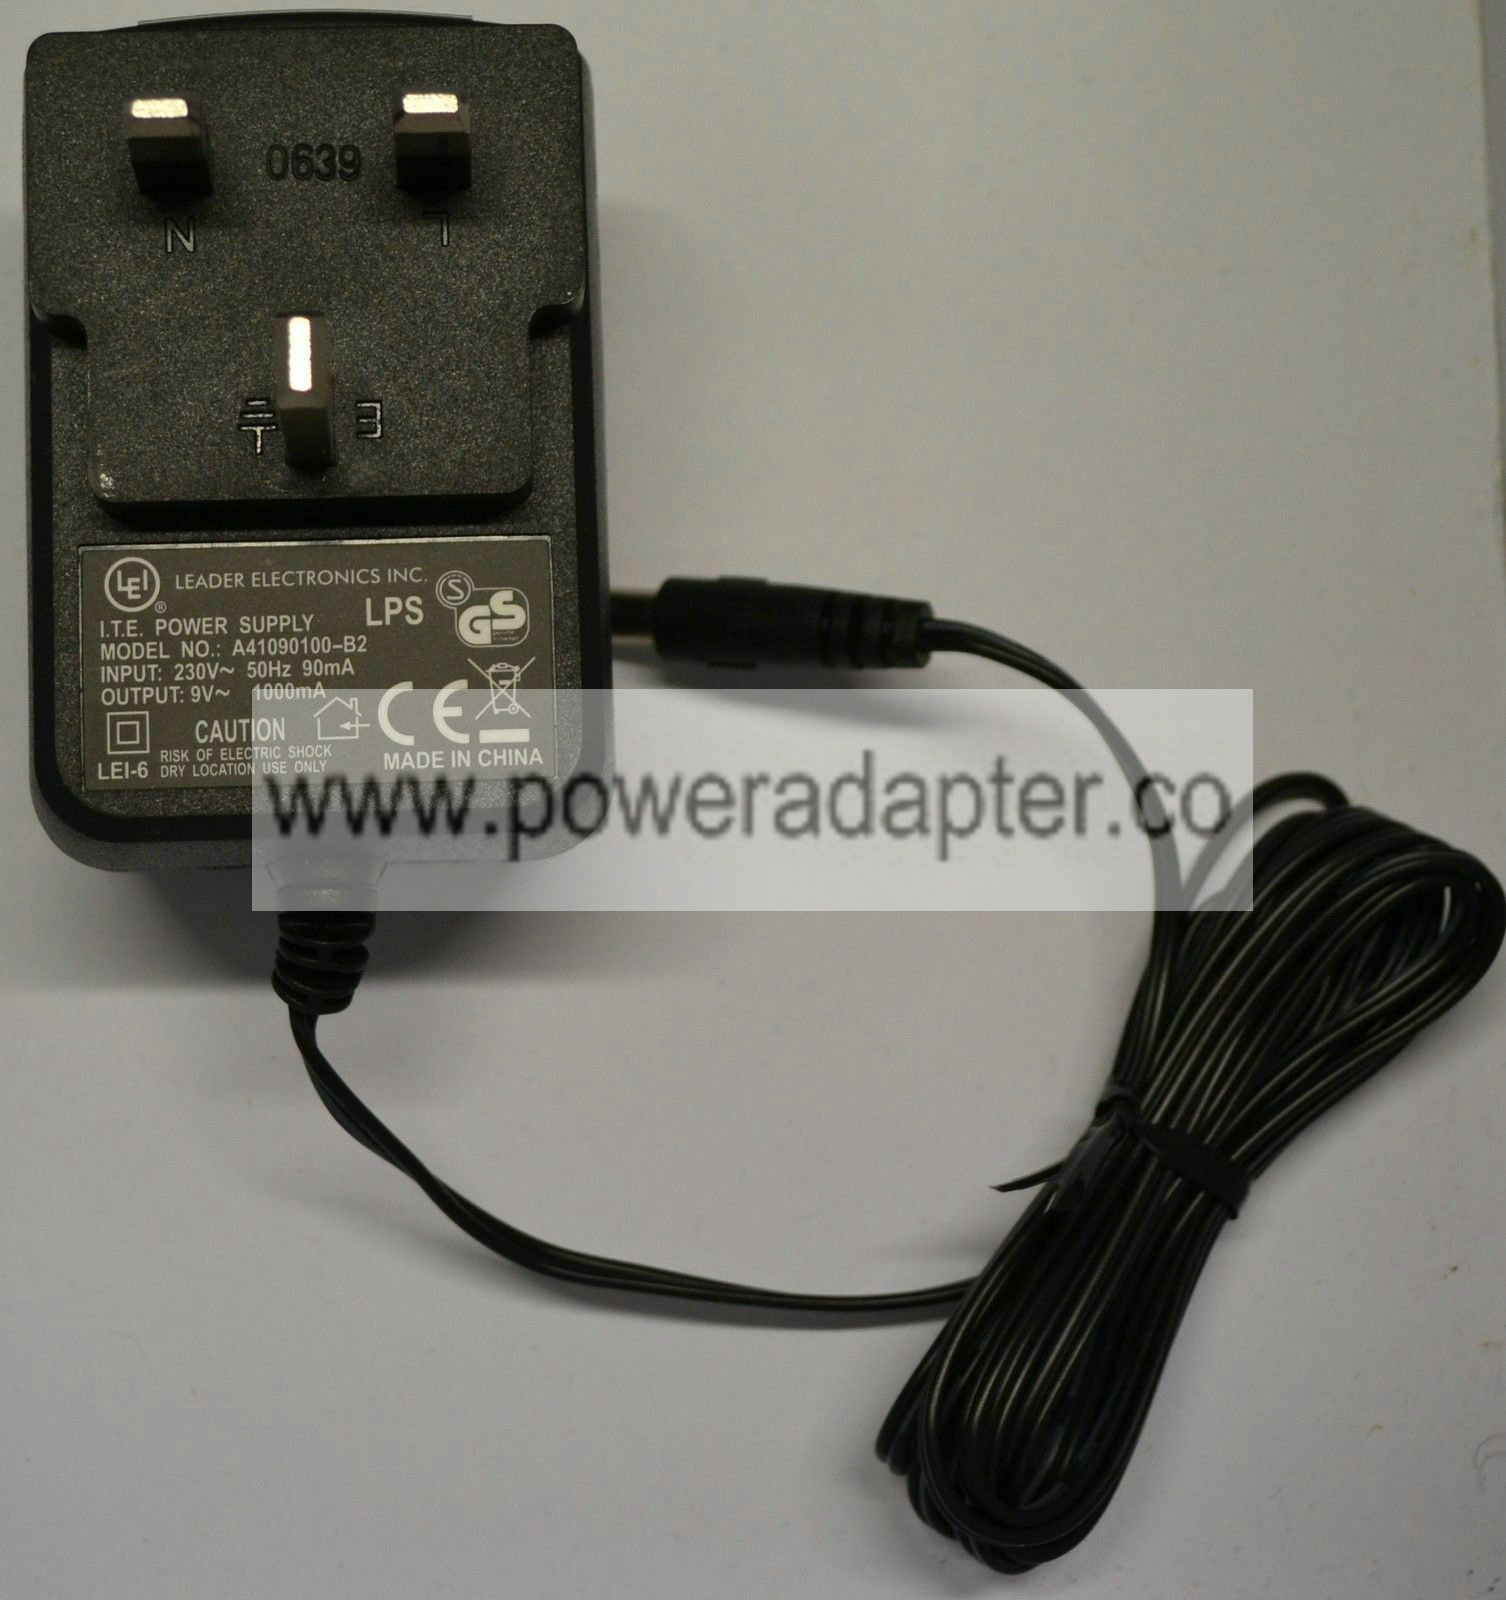 NEW LEI Power Supply Adapter 9V 1000mA / 1A AC Output Dimension 5.5mm x 2.1mm Custom Bundle: No Type: Power Supply Un